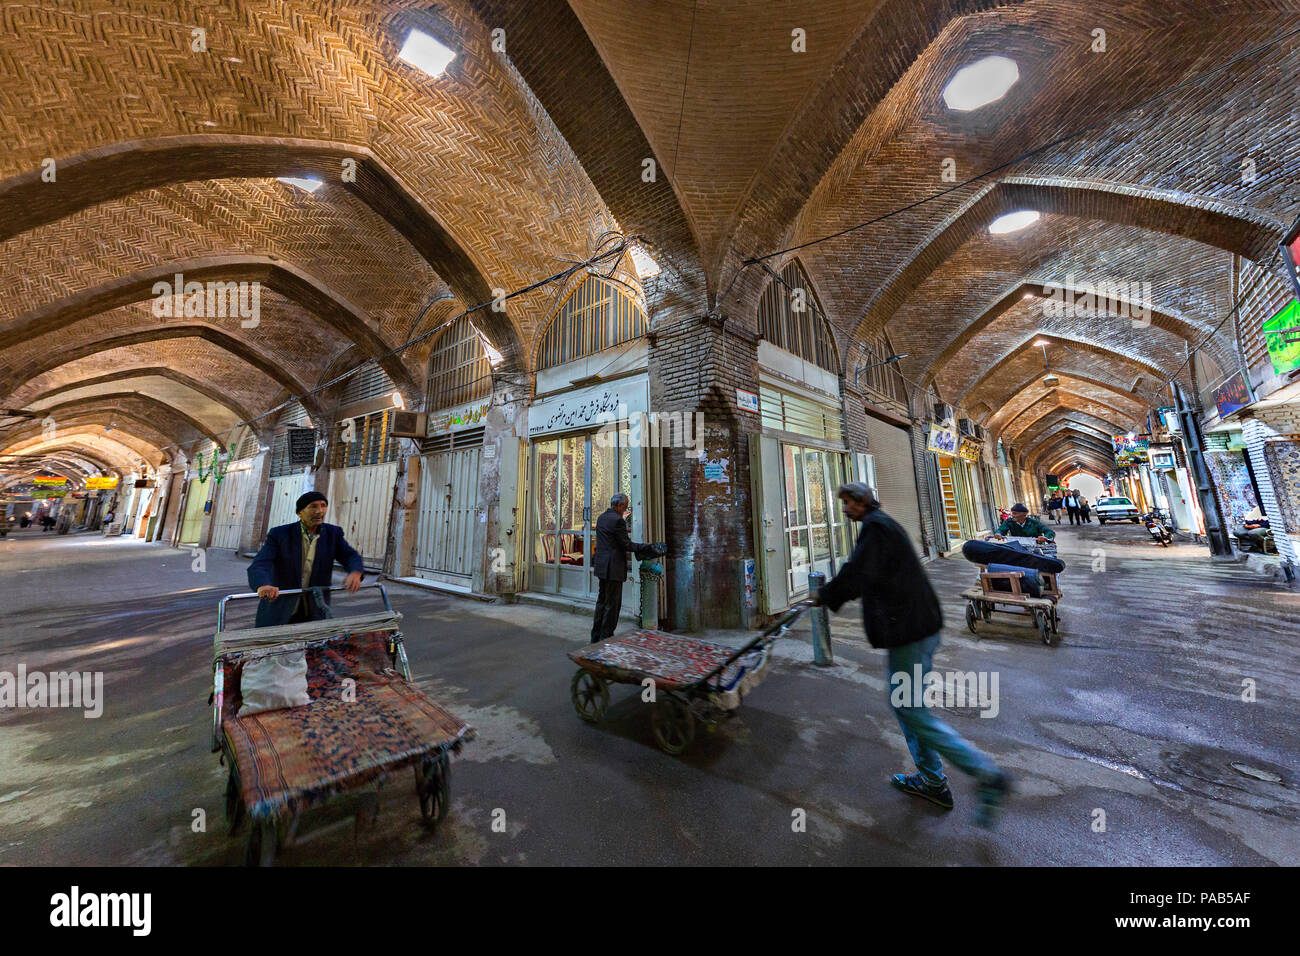 Ancient bazaar near the Naghshejehan Square, in then old part of the city, in Isfahan, Iran. Stock Photo